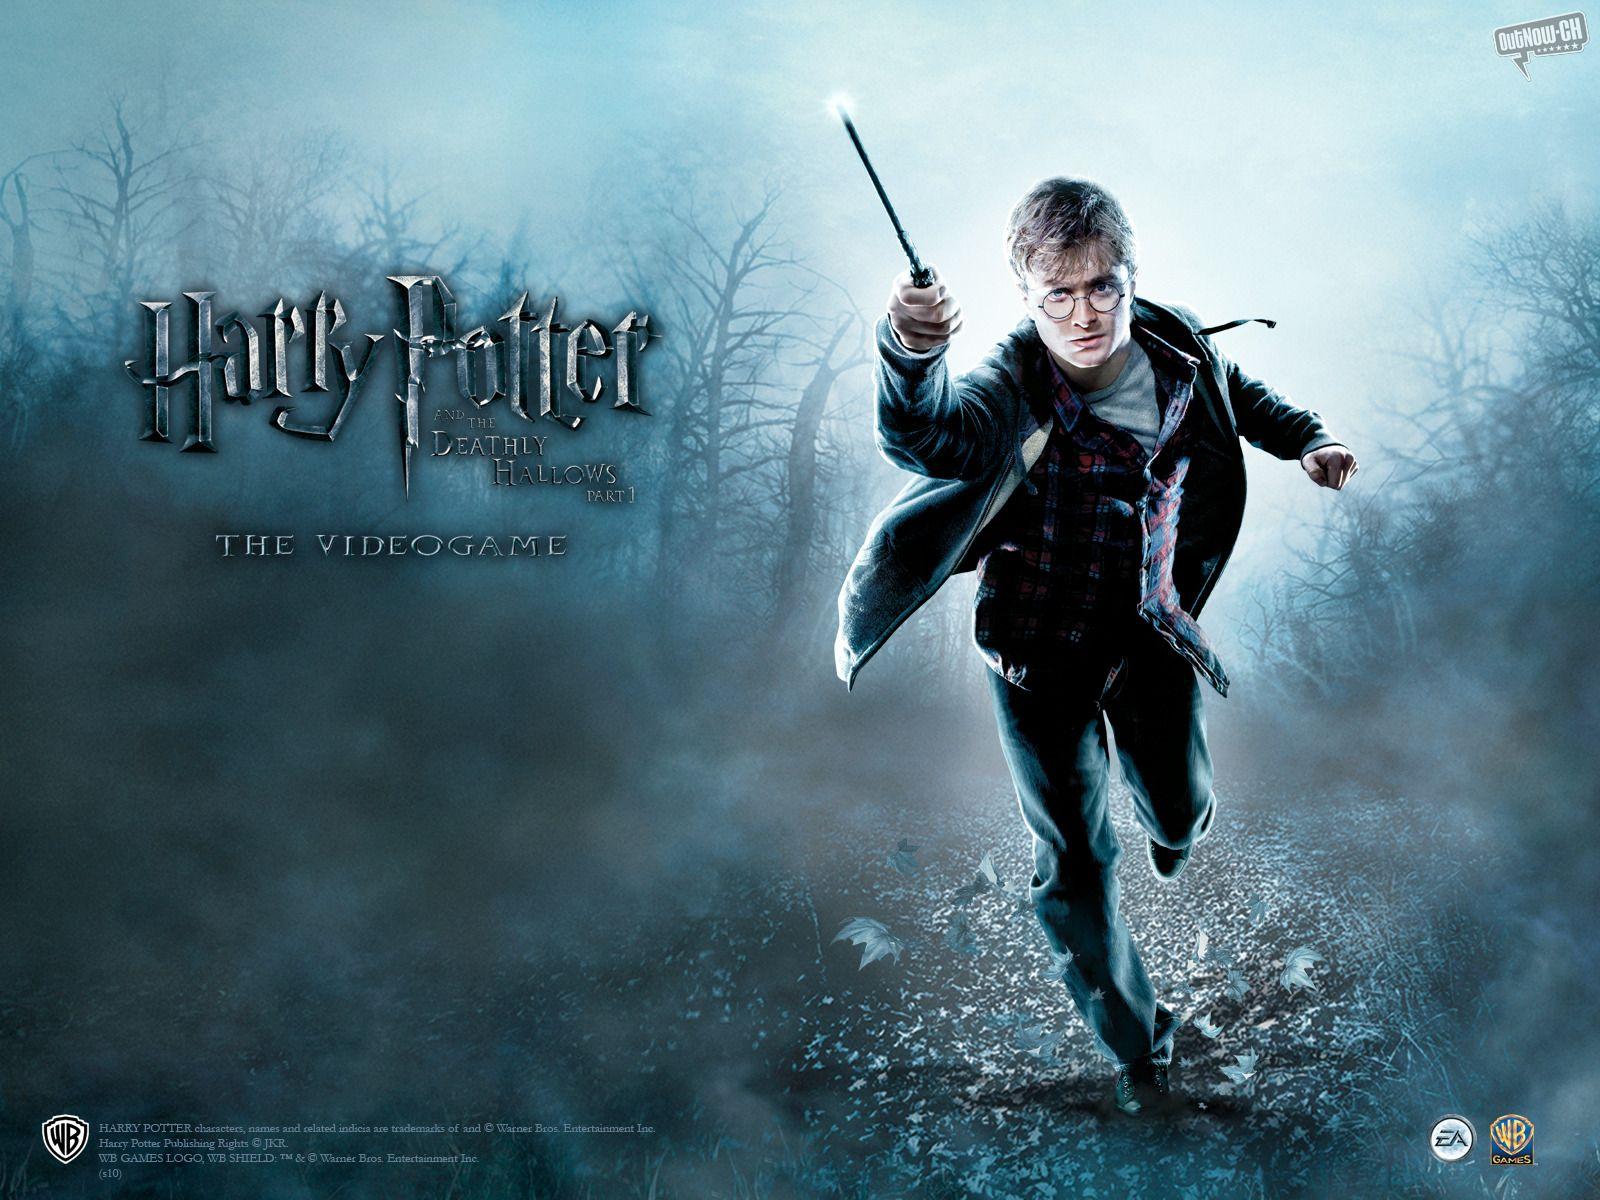 Harry Potter: Deathly Hallows wallpaper. Harry Potter: Deathly